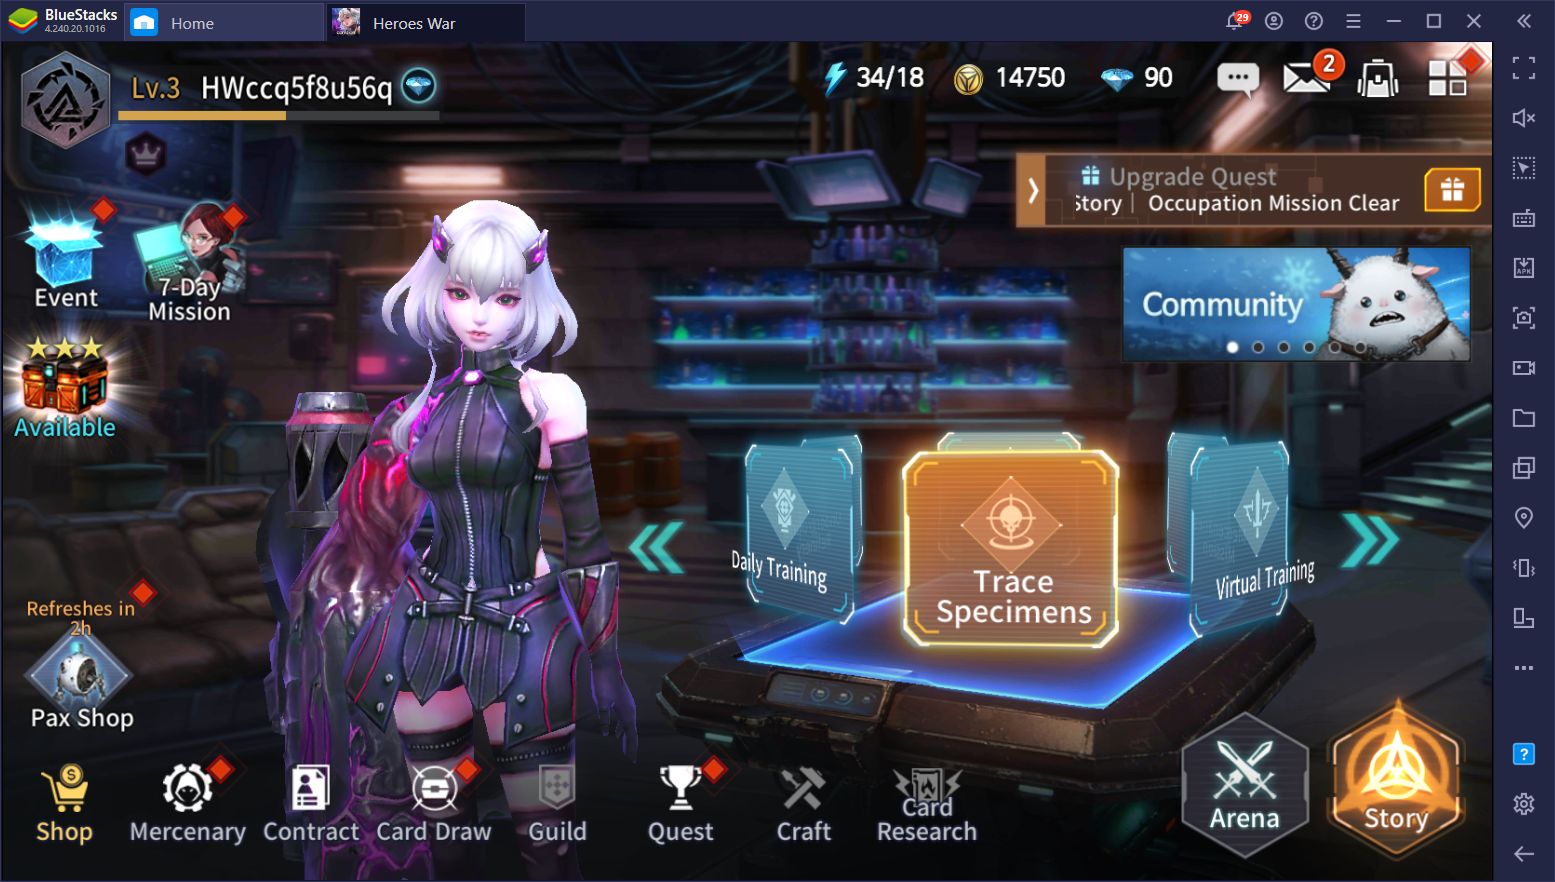 Heroes War: Counterattack on PC - How to Use BlueStacks for Easy Rerolls and Improved Controls